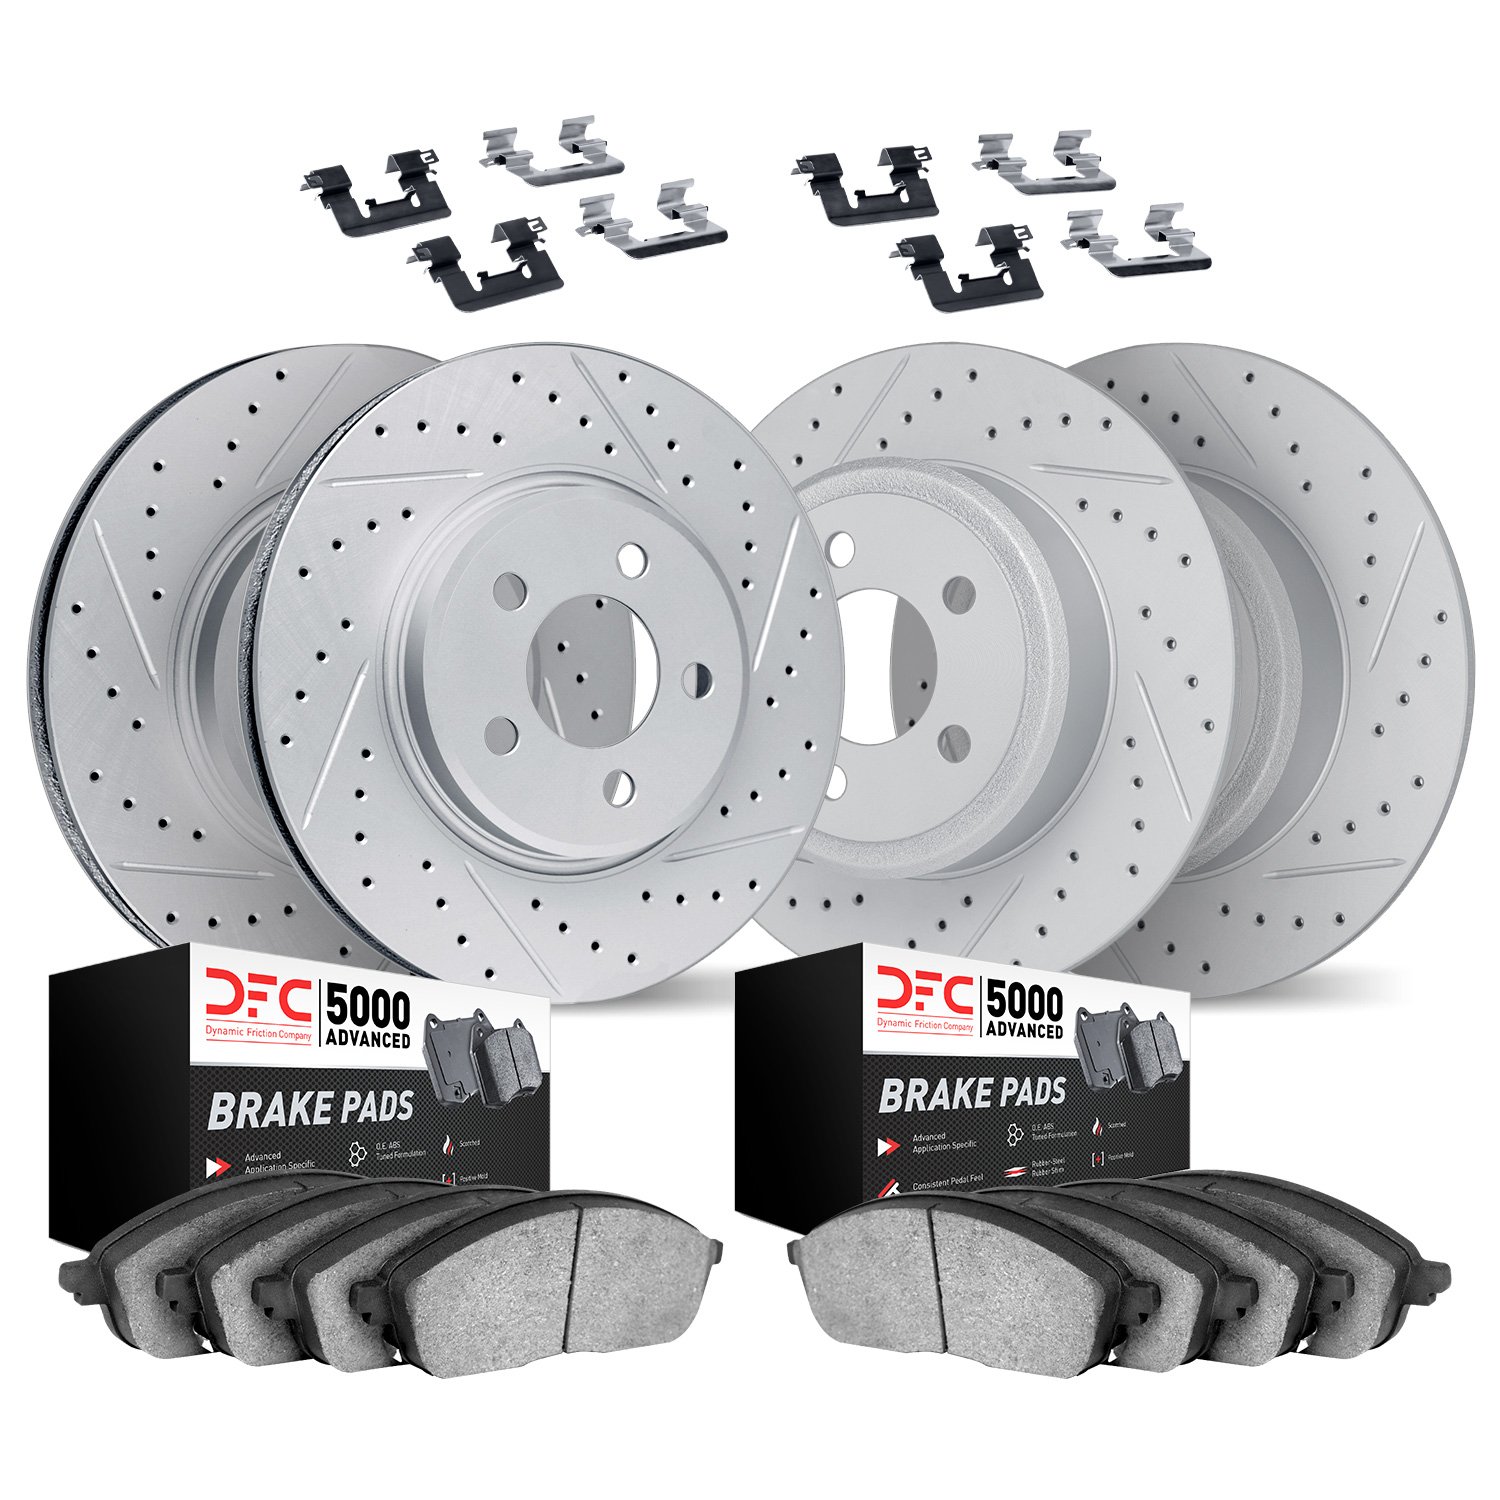 2514-13010 Geoperformance Drilled/Slotted Rotors w/5000 Advanced Brake Pads Kit & Hardware, 2015-2021 Subaru, Position: Front an